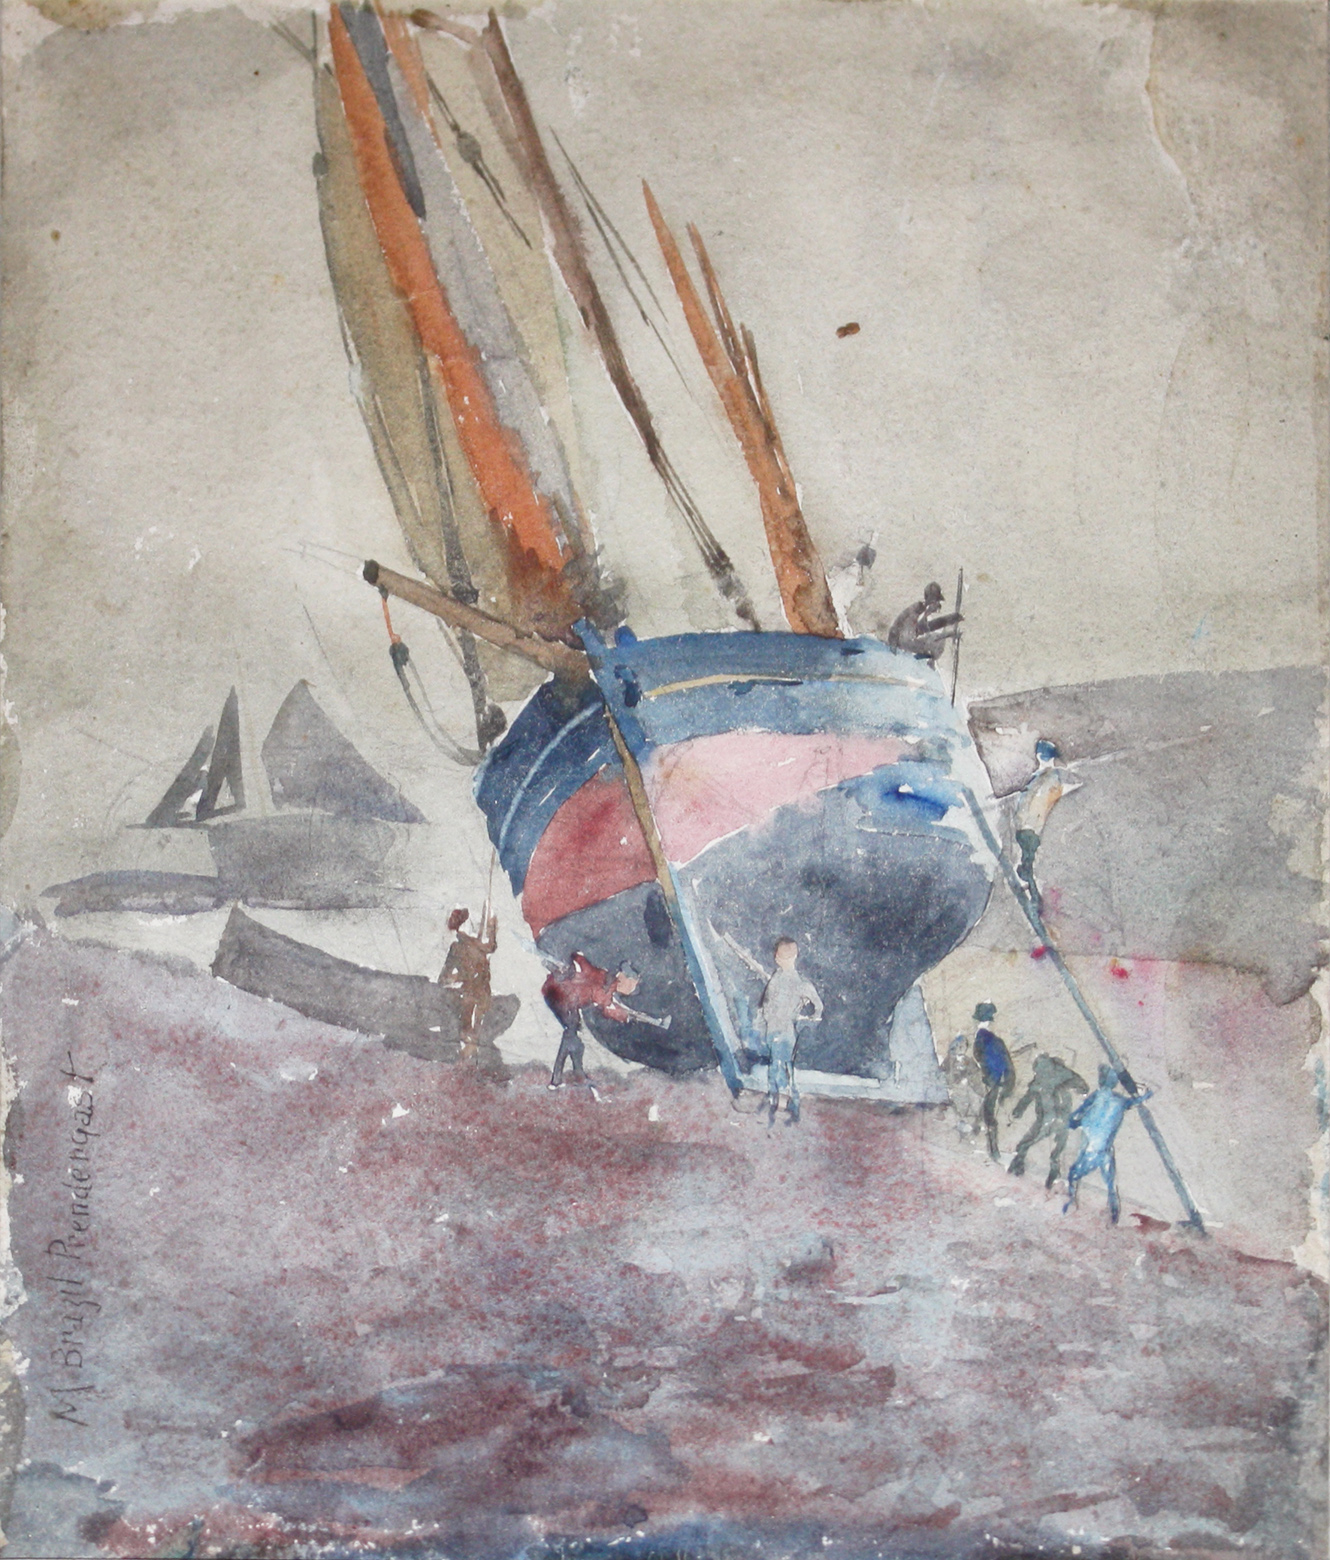 Watercolor of figures overhauling a large sailboat